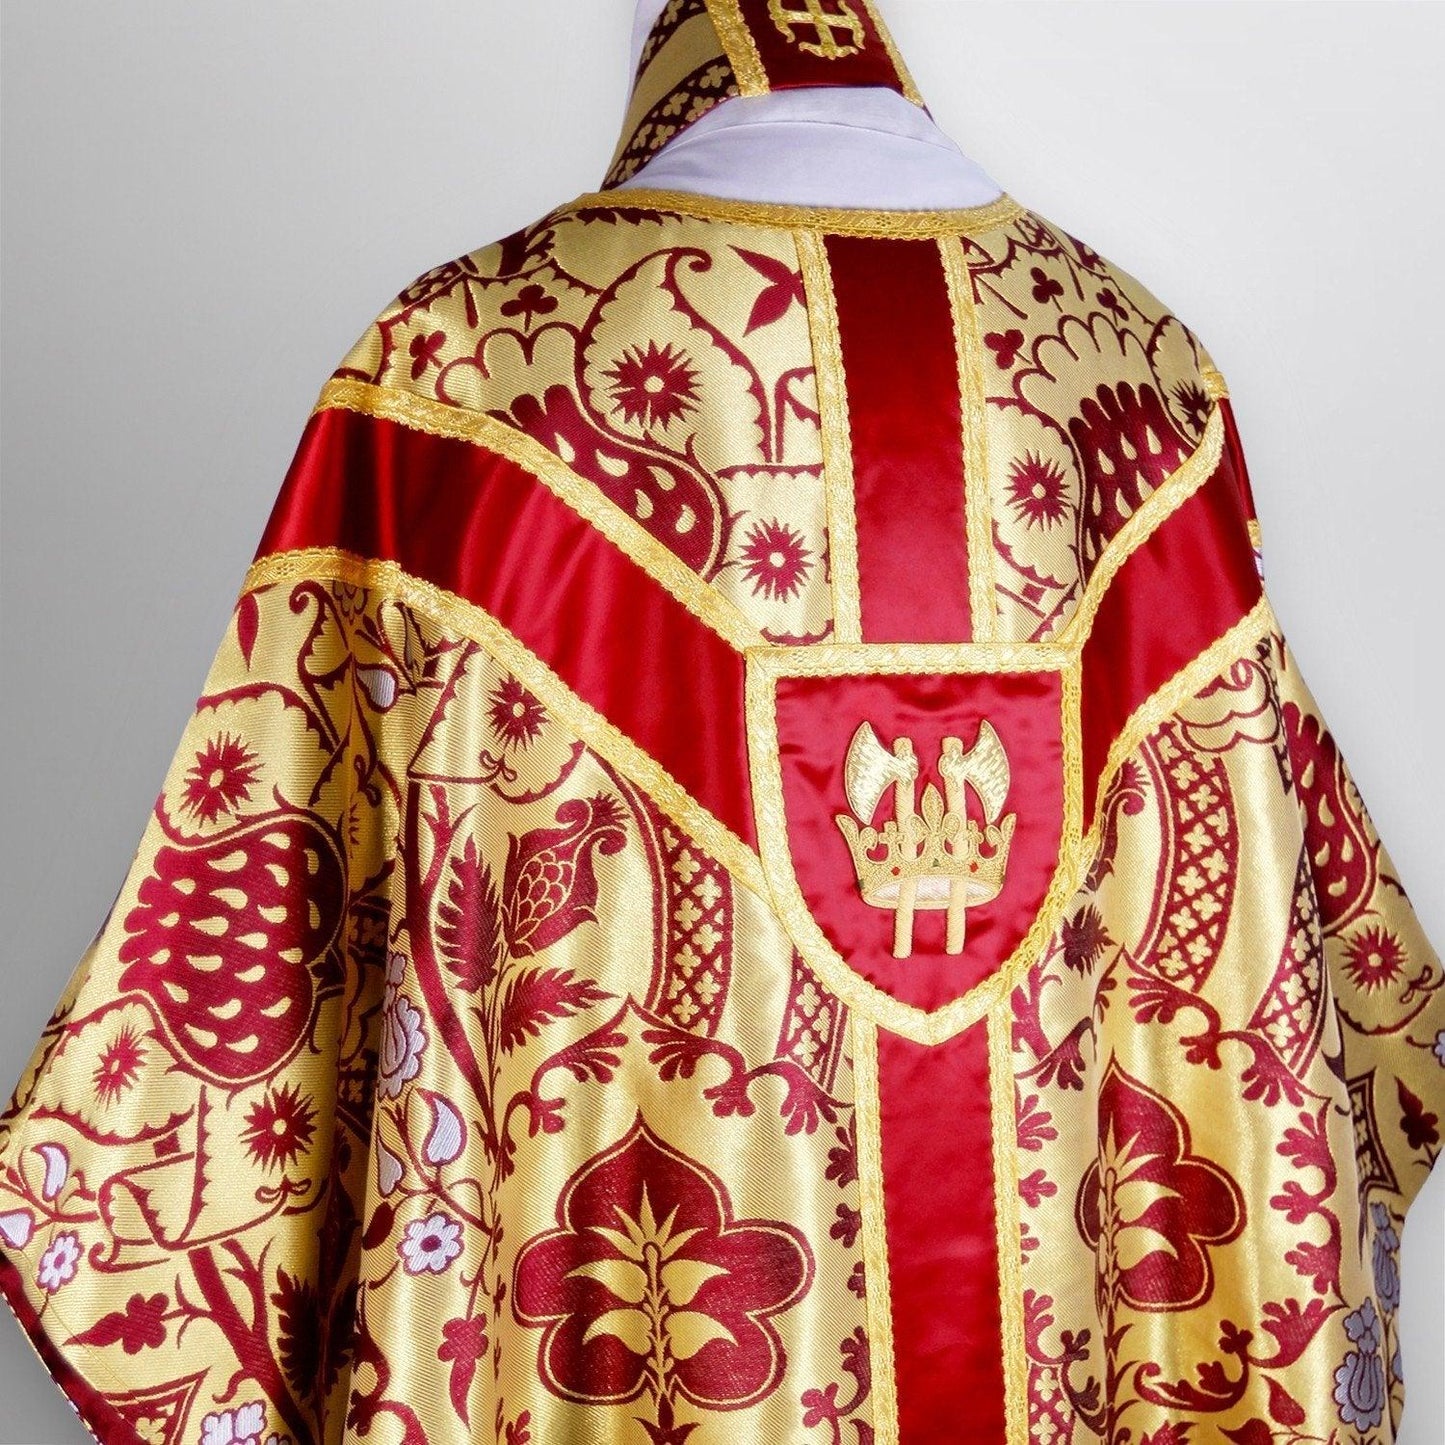 Full Gothic Chasuble in Red/White/Gold Comper Strawberry - Watts & Co. (international)